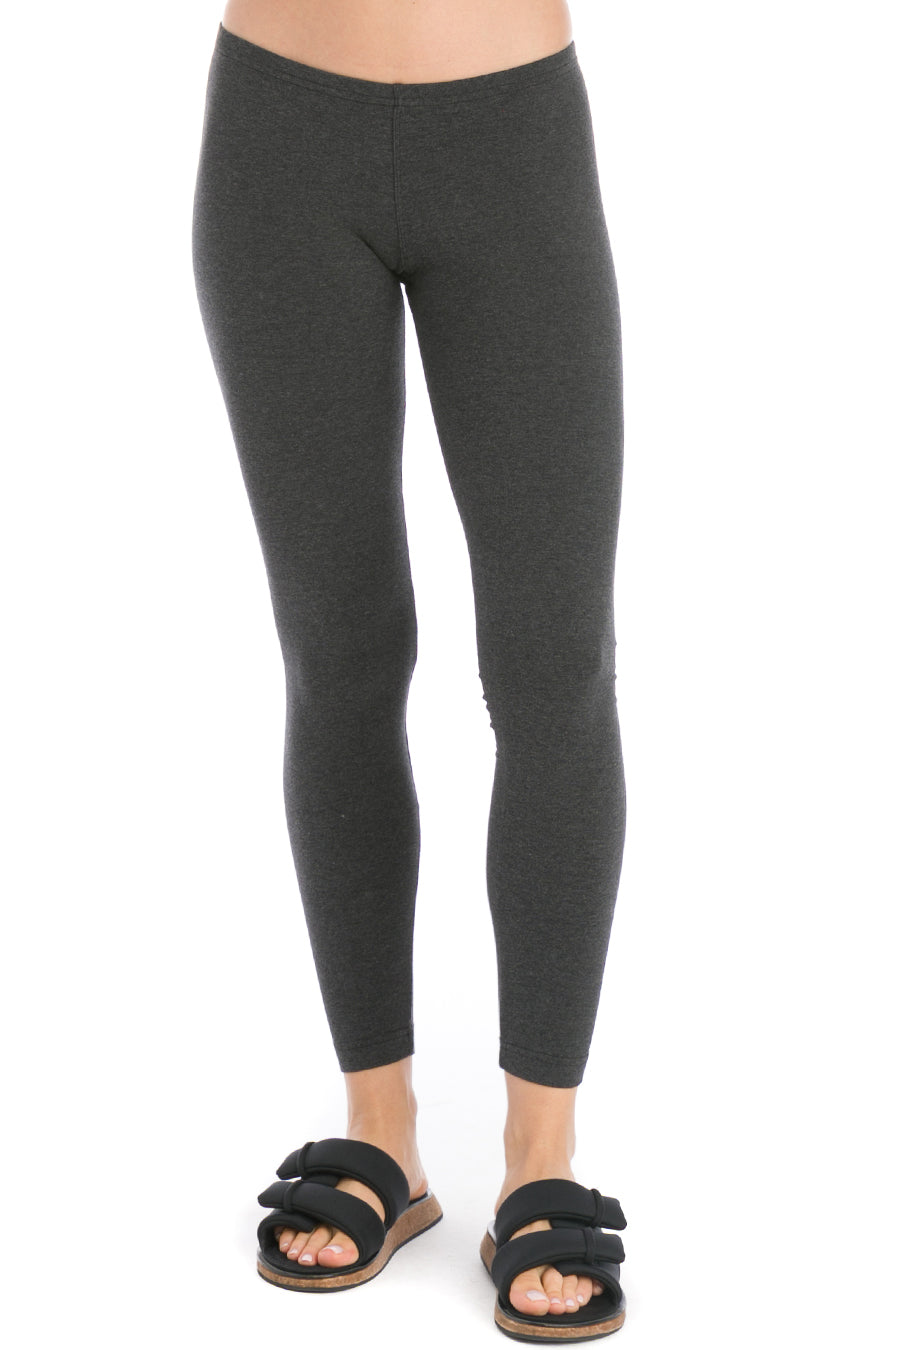 Hard Tail Forever Low Rise Ankle Legging - Dark Charcoal Heather Gray - XS  - 2024 ❤️ CooperativaShop ✓